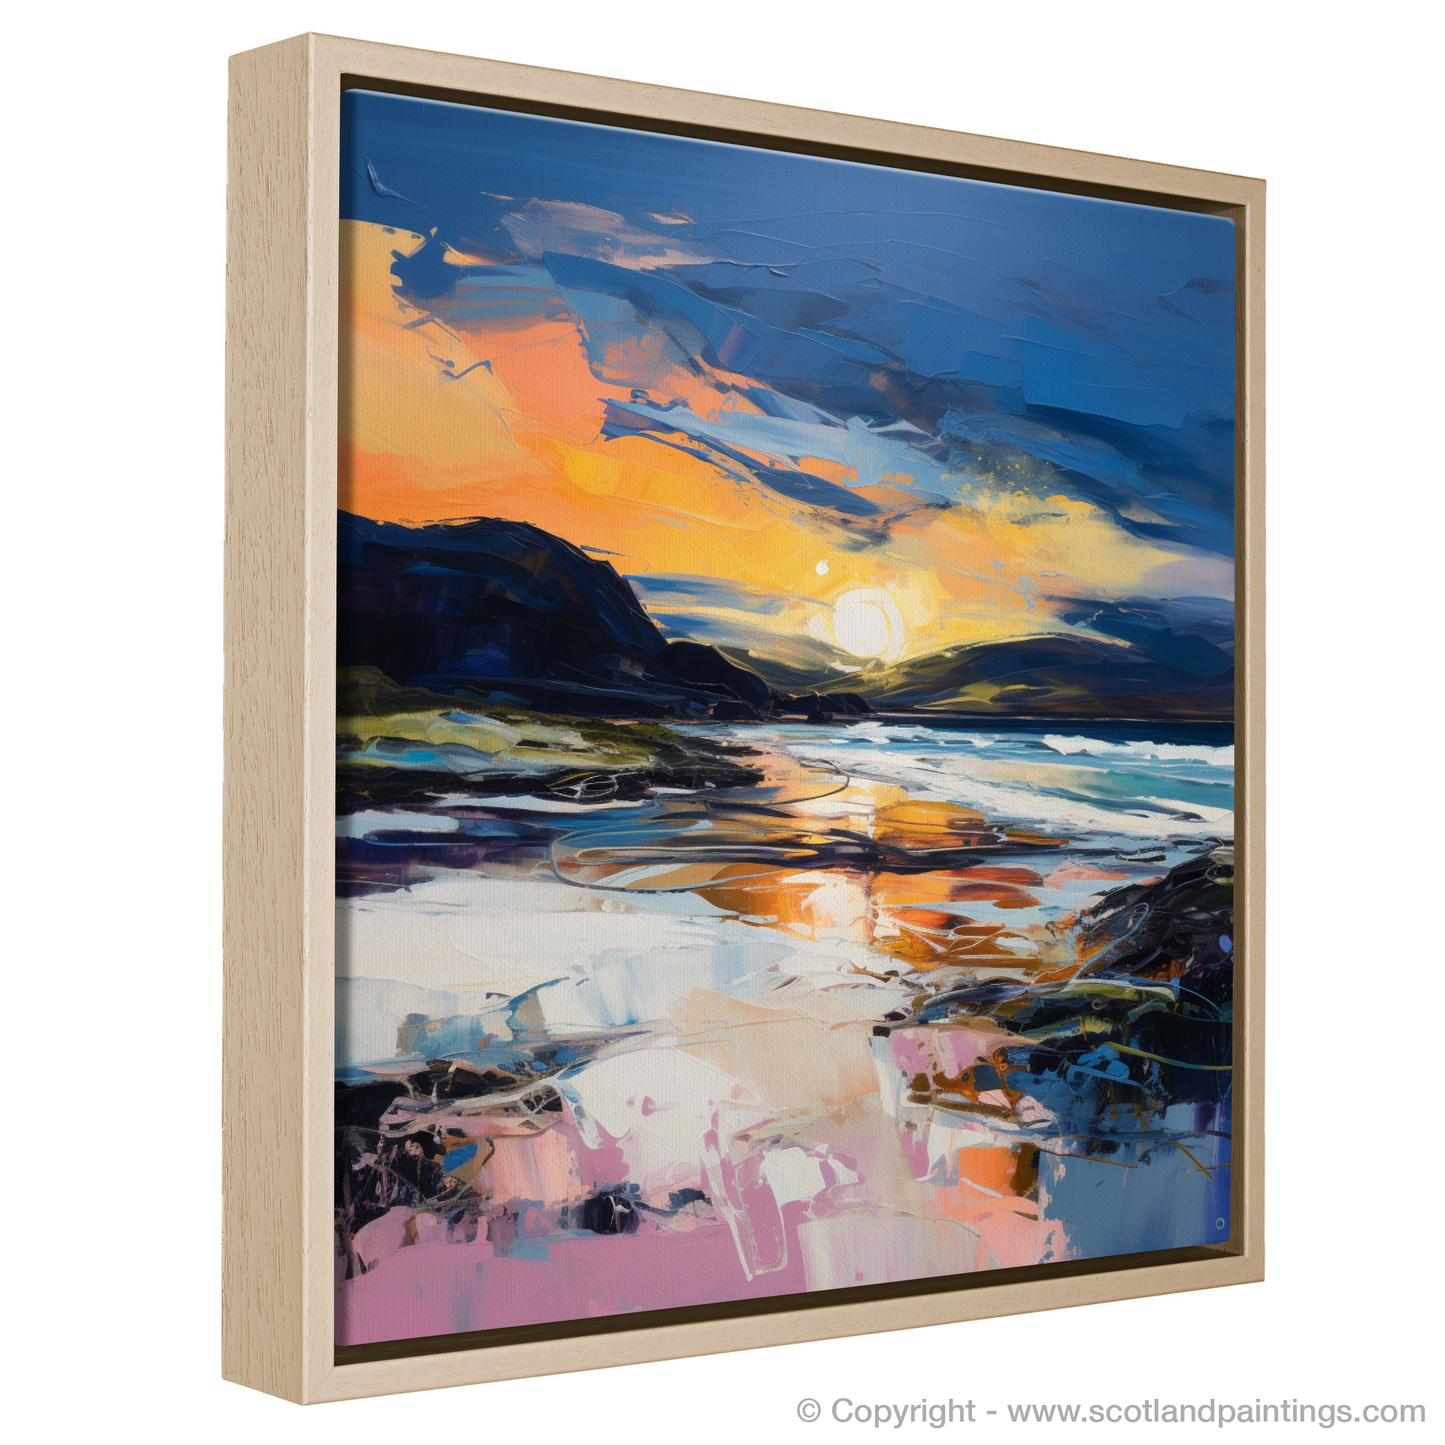 Painting and Art Print of Scarista Beach at dusk entitled "Dusk's Embrace at Scarista Beach".